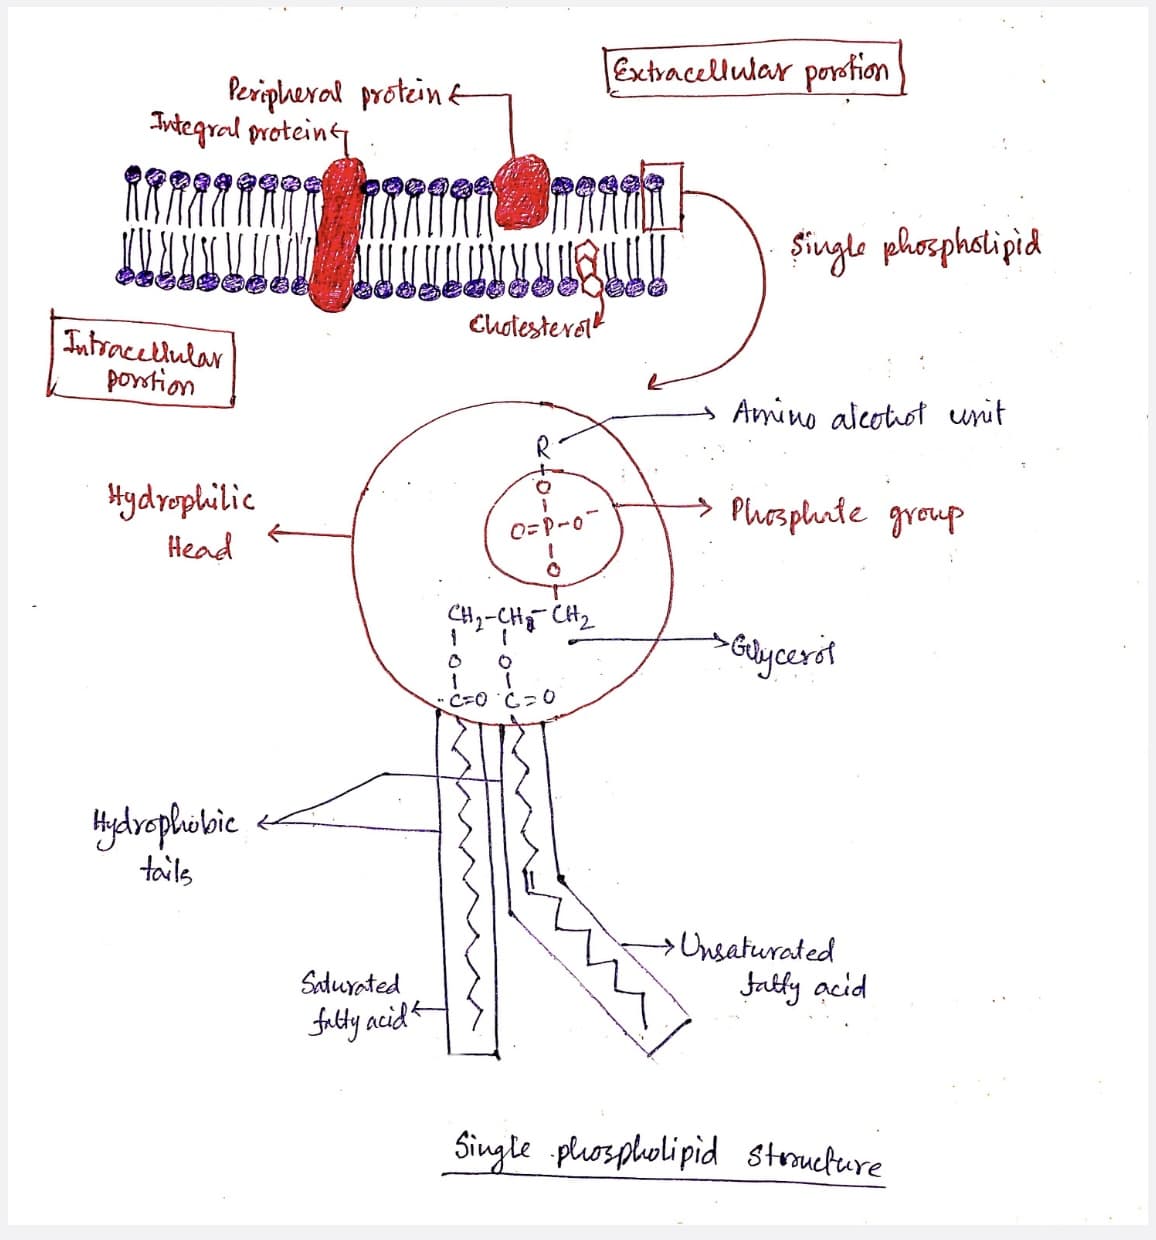 Peripheral protein t
Integral proteins
Intracellular
portion
Hydrophilic
Head
Hydrophobic
tails
Saturated
fatty acid
Il y
Cholesterol
to-d
O
O=P-0-
✪
CH₂-CH₂ CH₂
1
B
O
1
C=0C=0
Extracellular portion
Single phospholipid
Amino alcohot unit
→ Phosphate group
→ Glycerof
→ Unsaturated
fatty acid
Single phospholipid structure